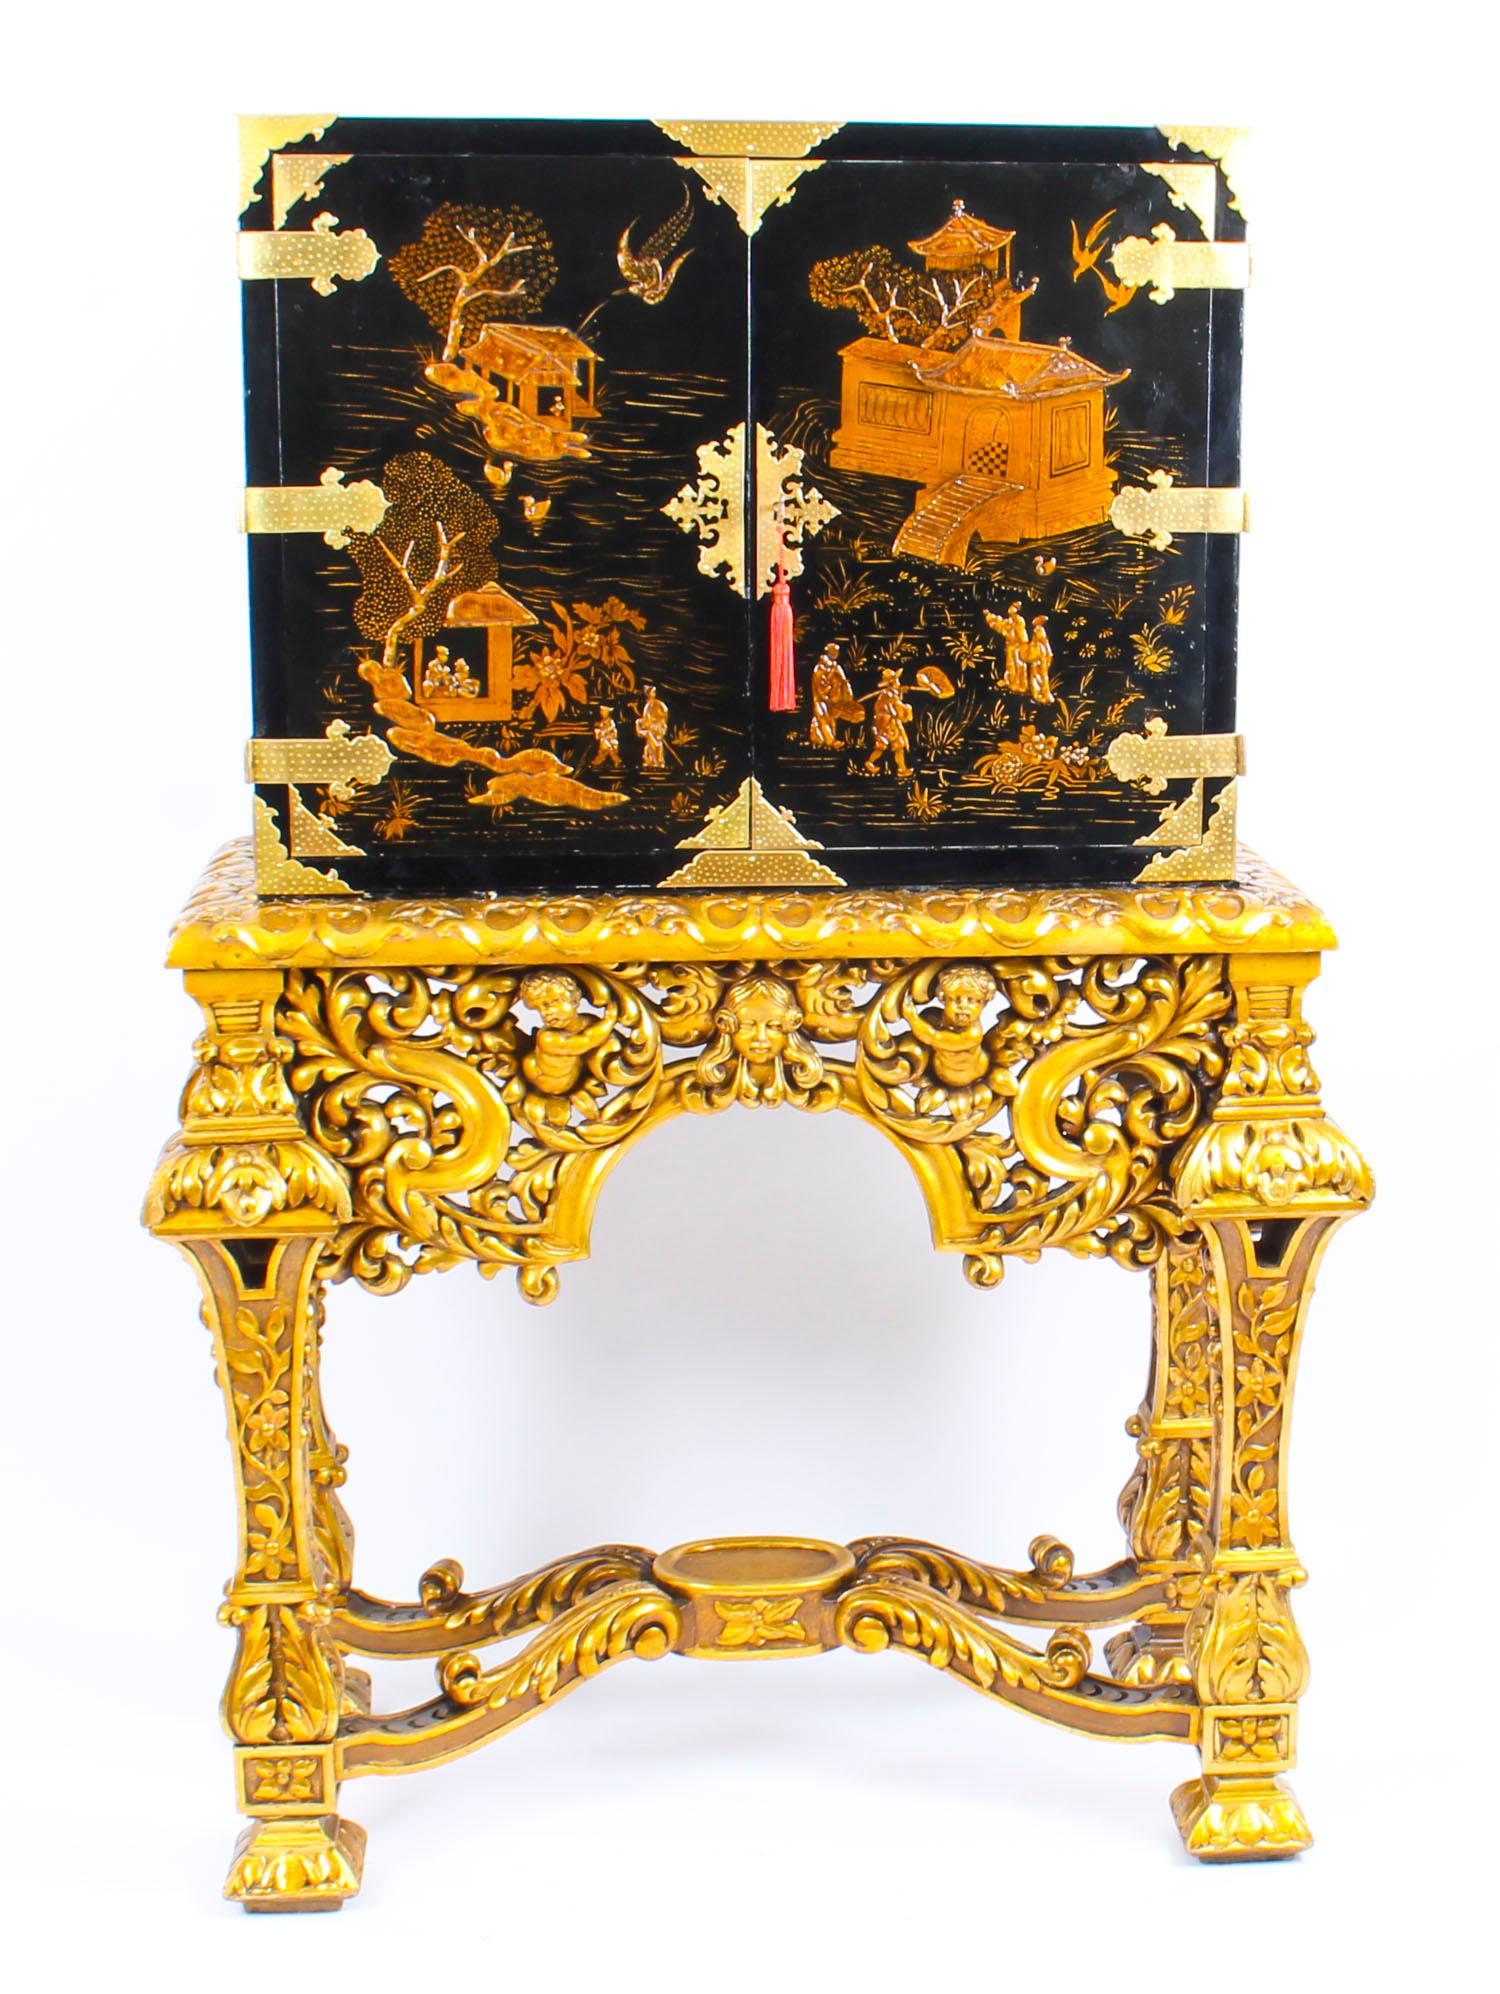 This is beautifully crafted antique 17th century Revival Chinoiserie lacquer cabinet on stand, circa 1900 in date. 

The cabinet features figural scenes to the twin doors and opens to further figures and animals on a red lacquered ground to the